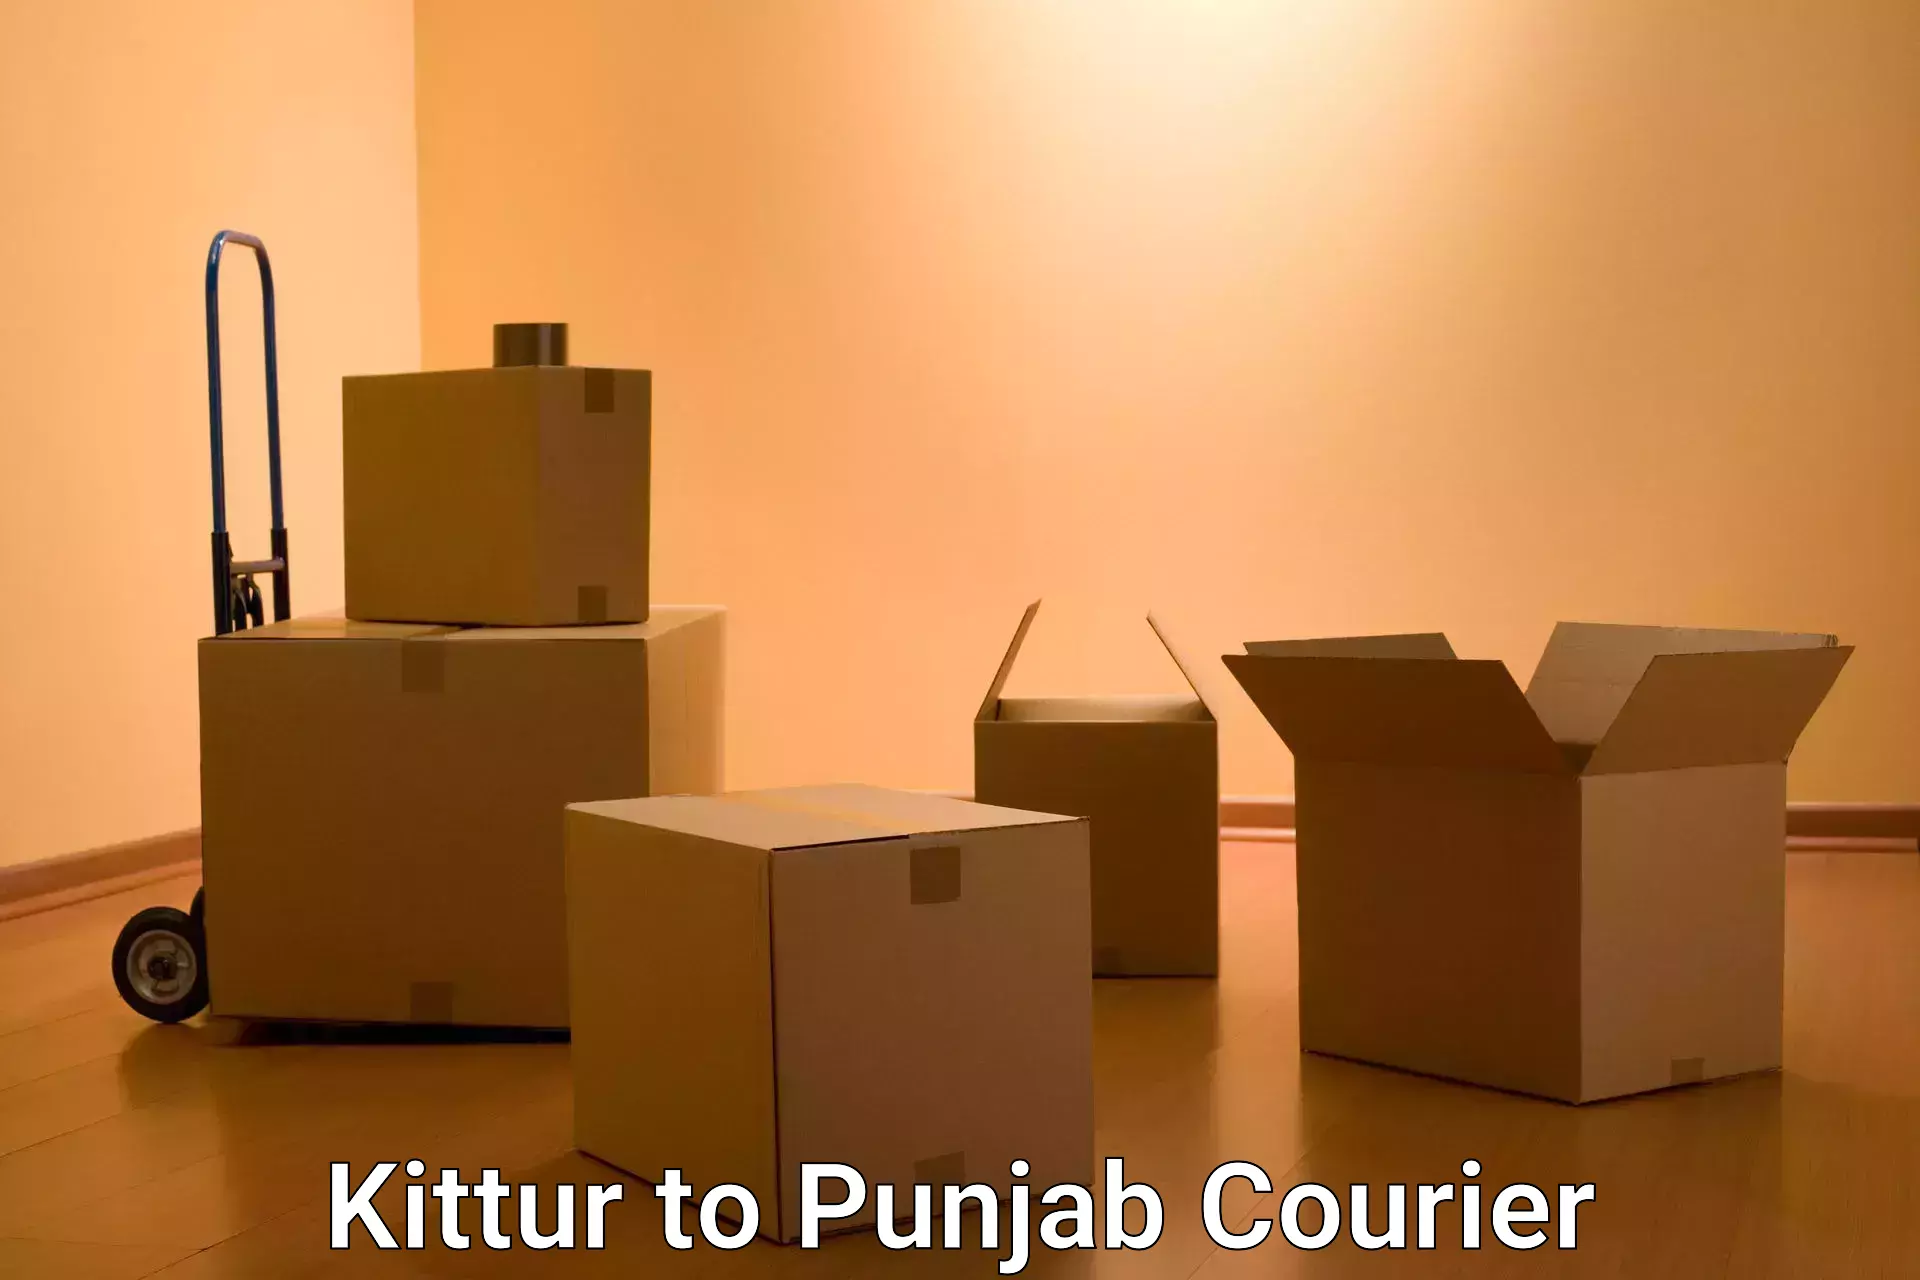 Global courier networks Kittur to Batala